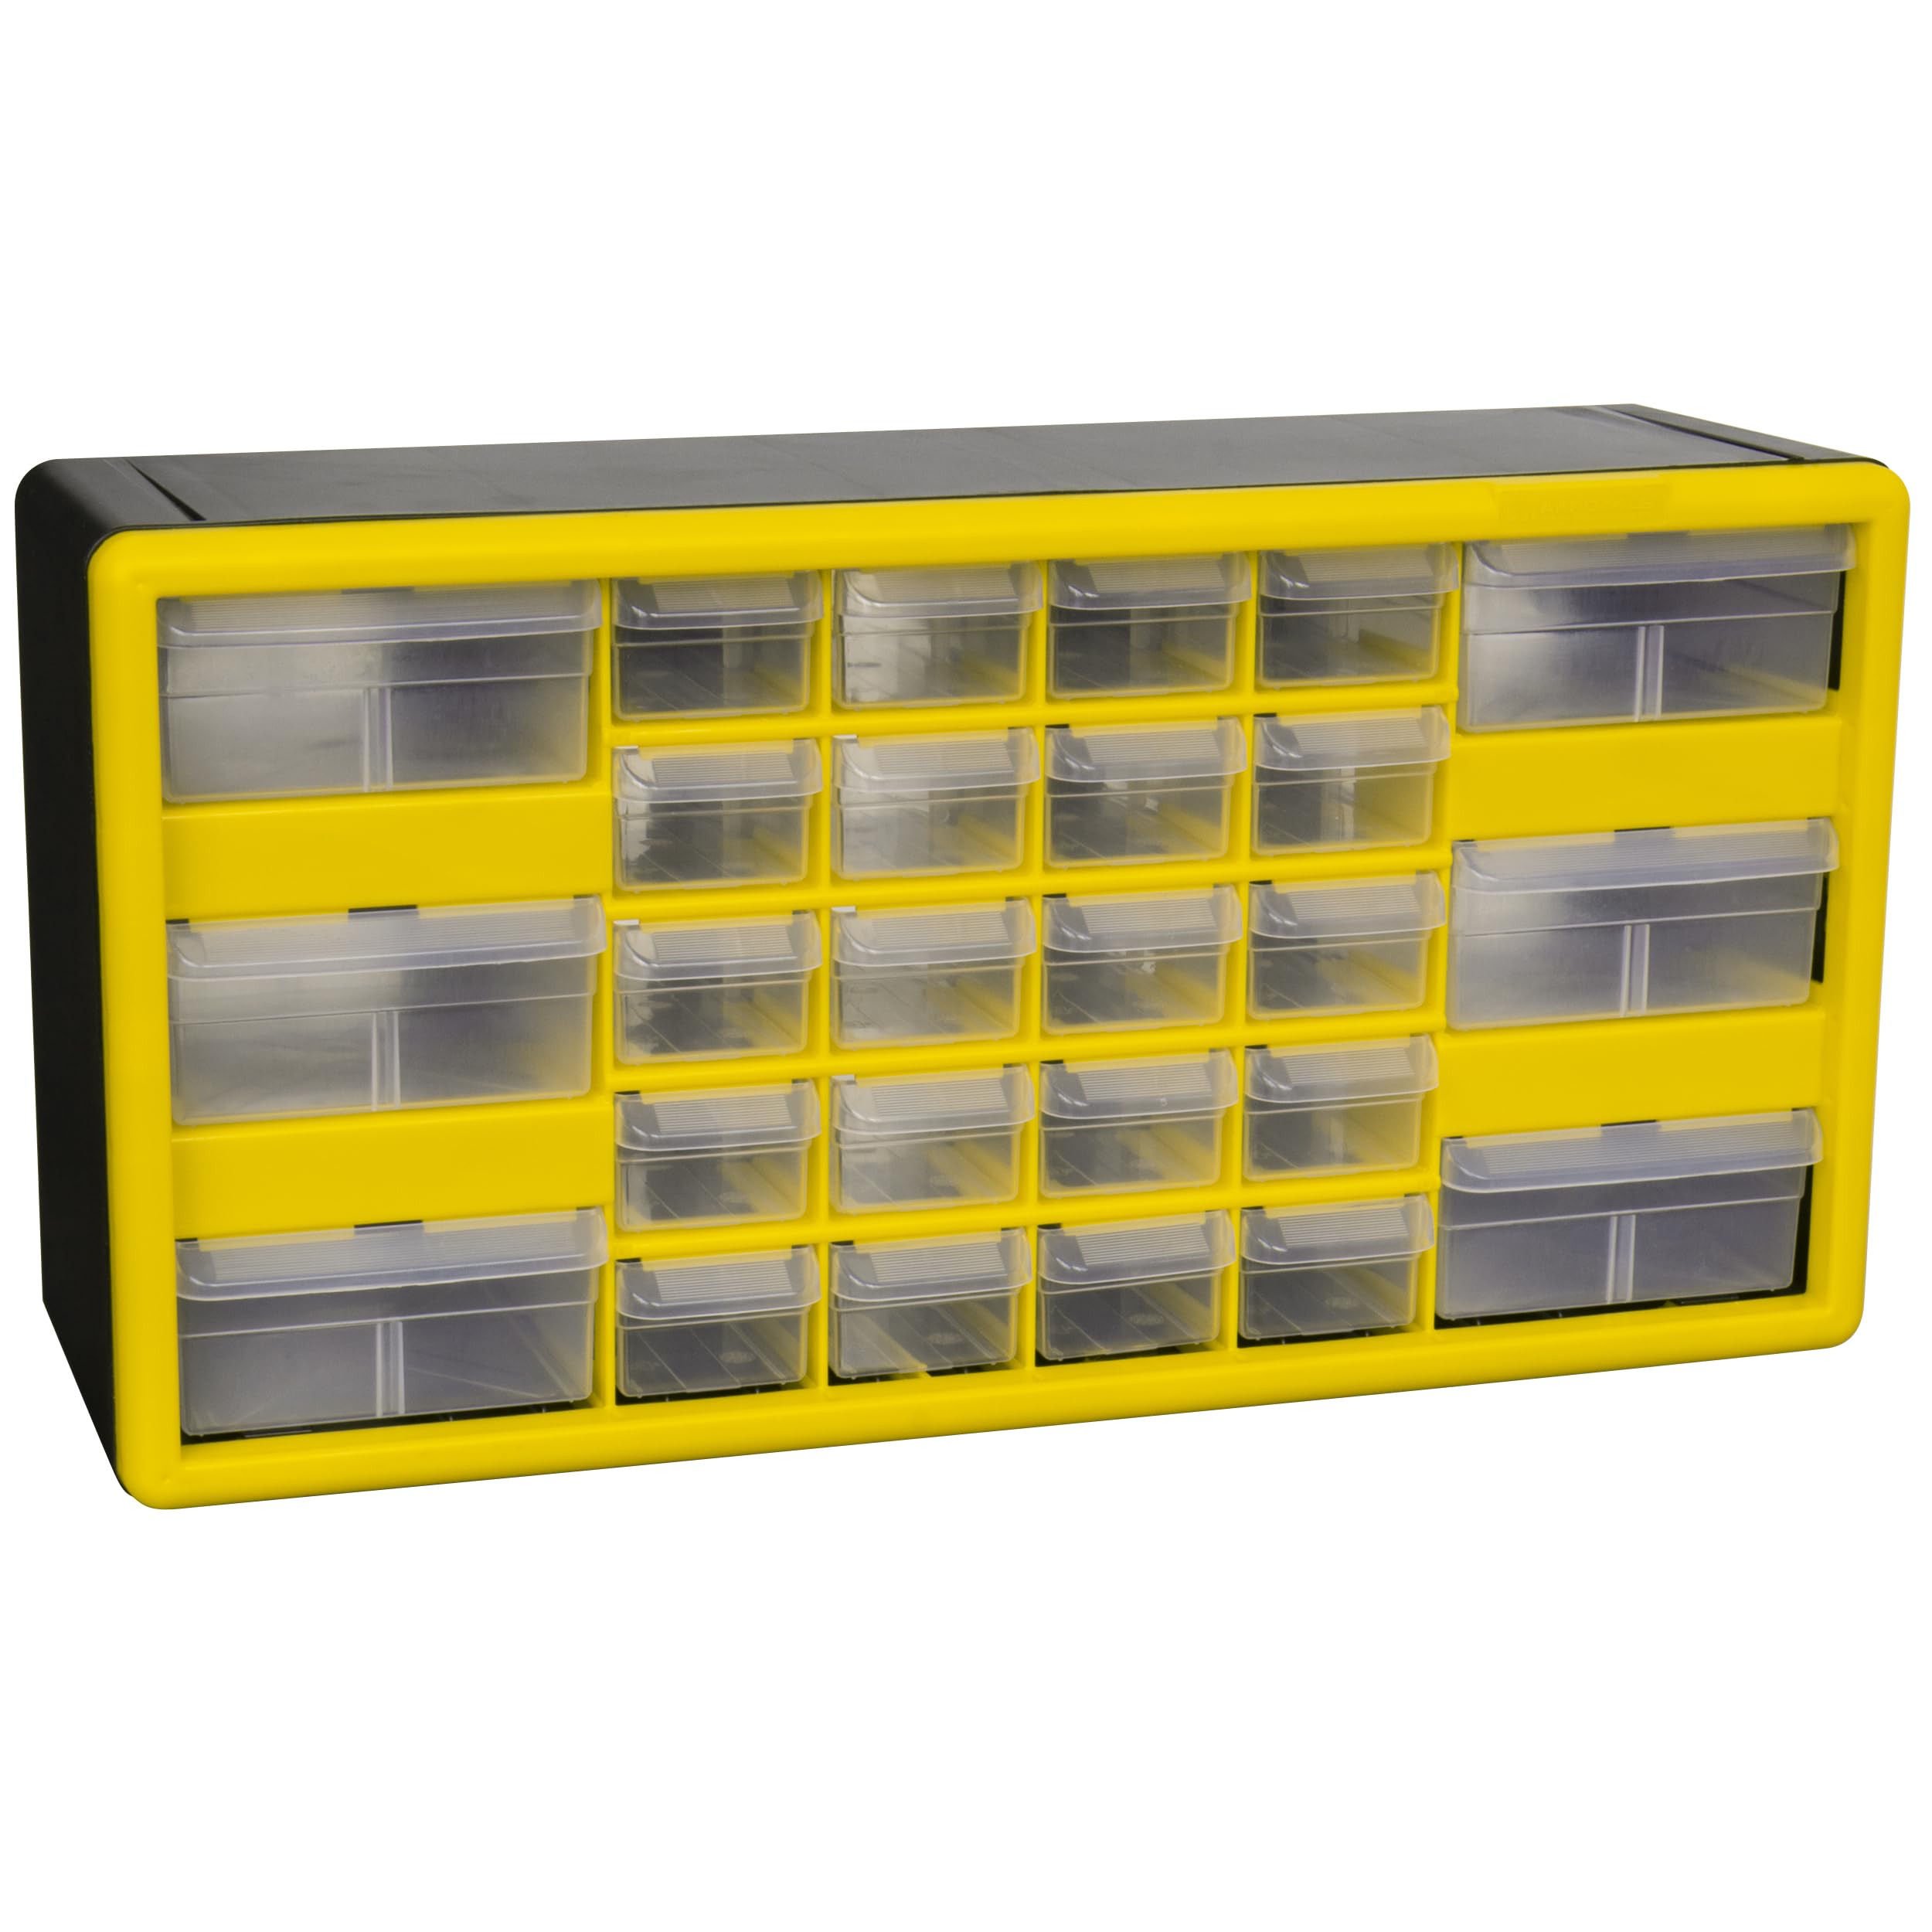 Akro-Mils 10126 26 Drawer Plastic Parts Storage Hardware and Craft Cabinet, 20-Inch W x 6-Inch D x 10-Inch H, Yellow